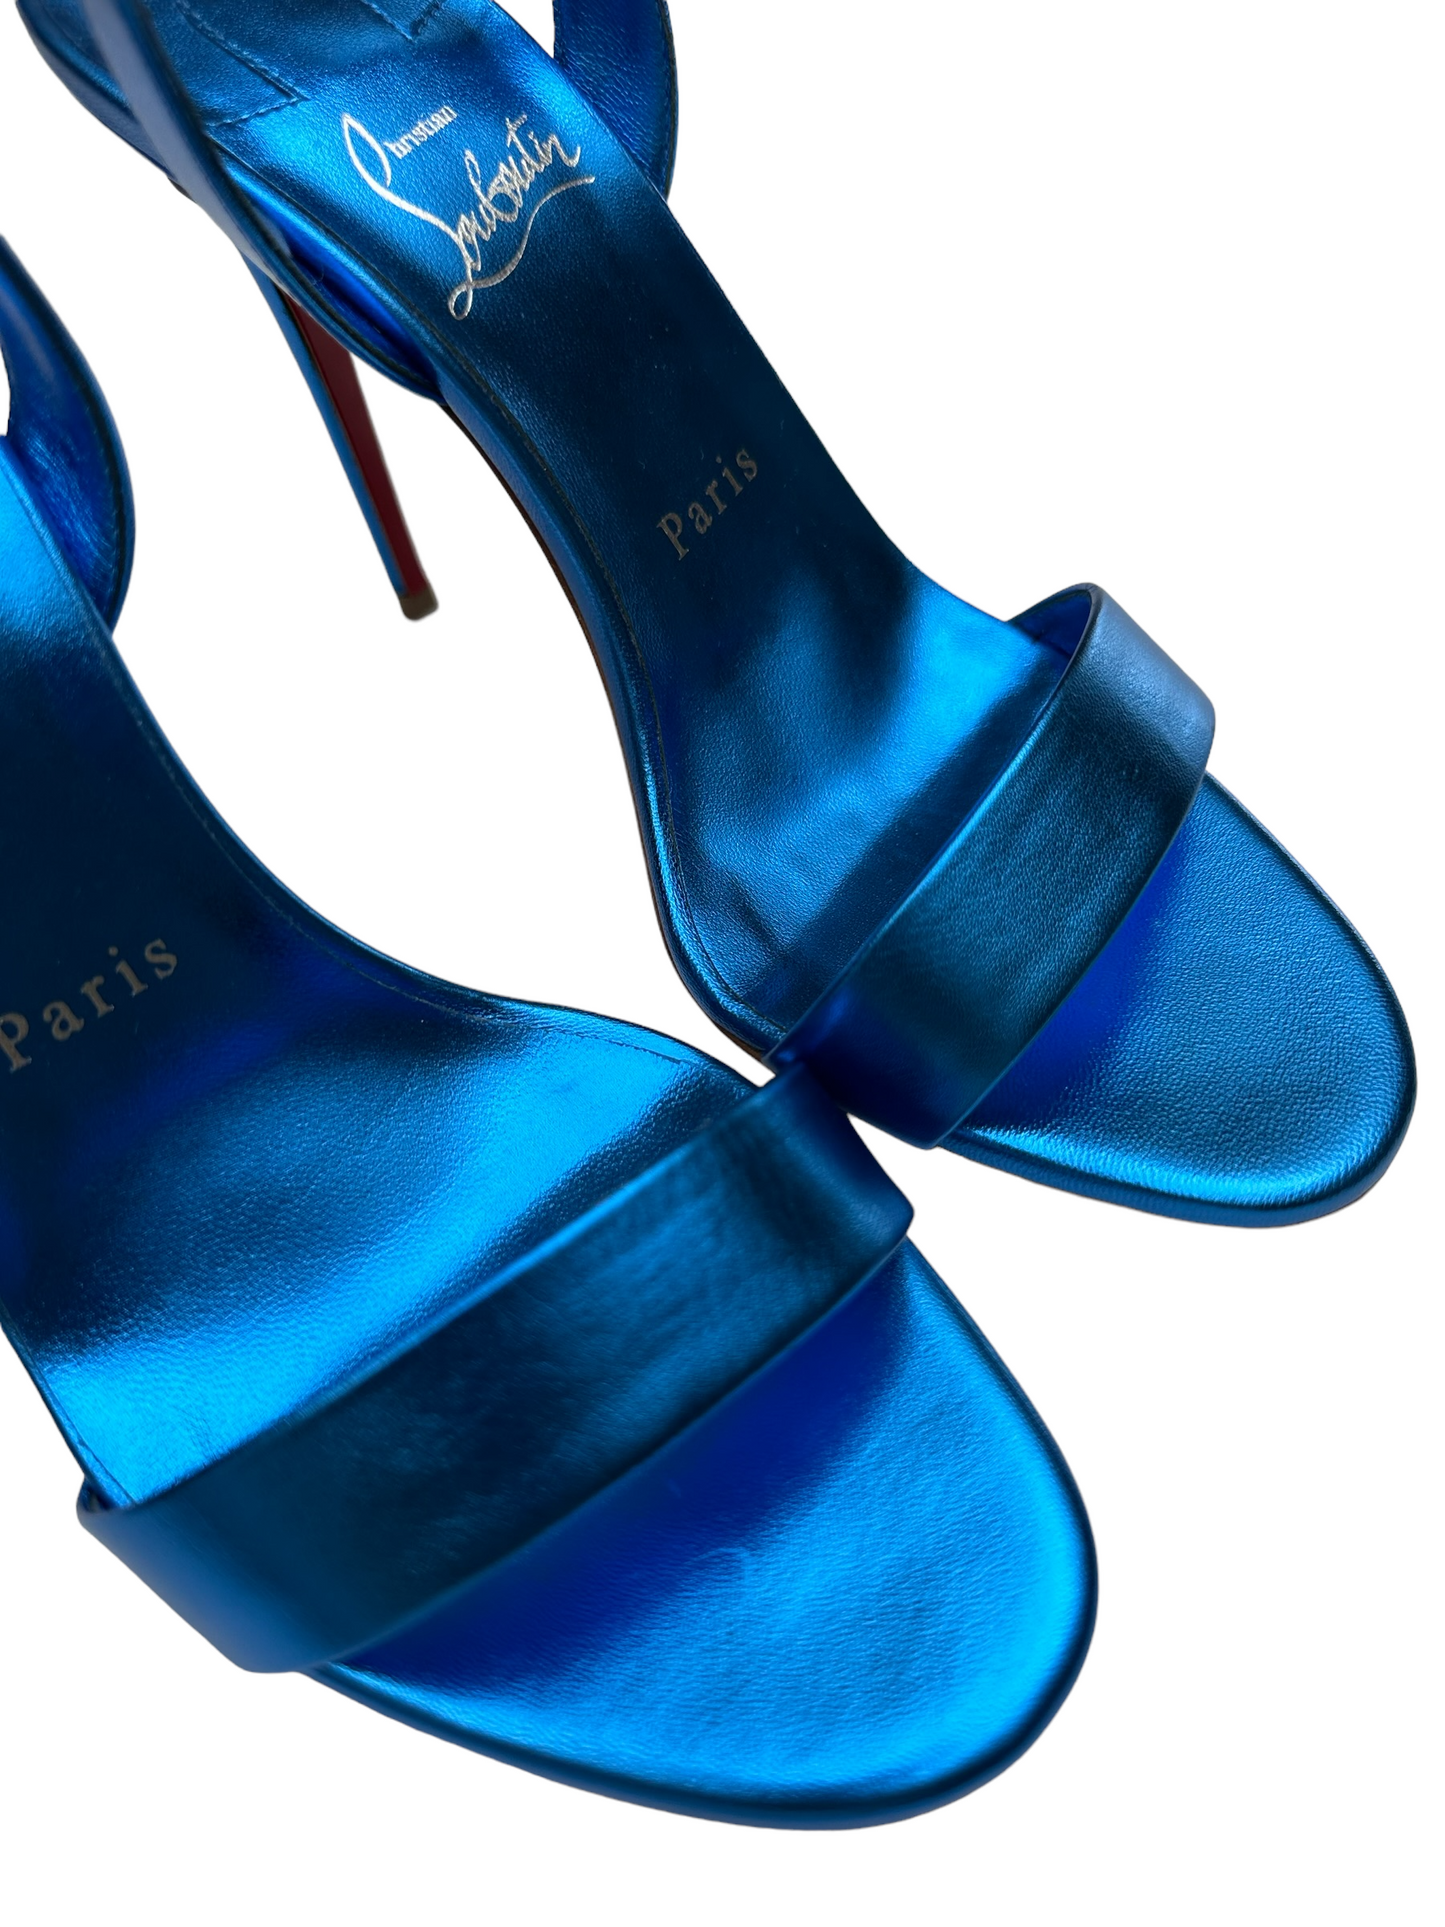 Blue Patent Leather Heels - 7